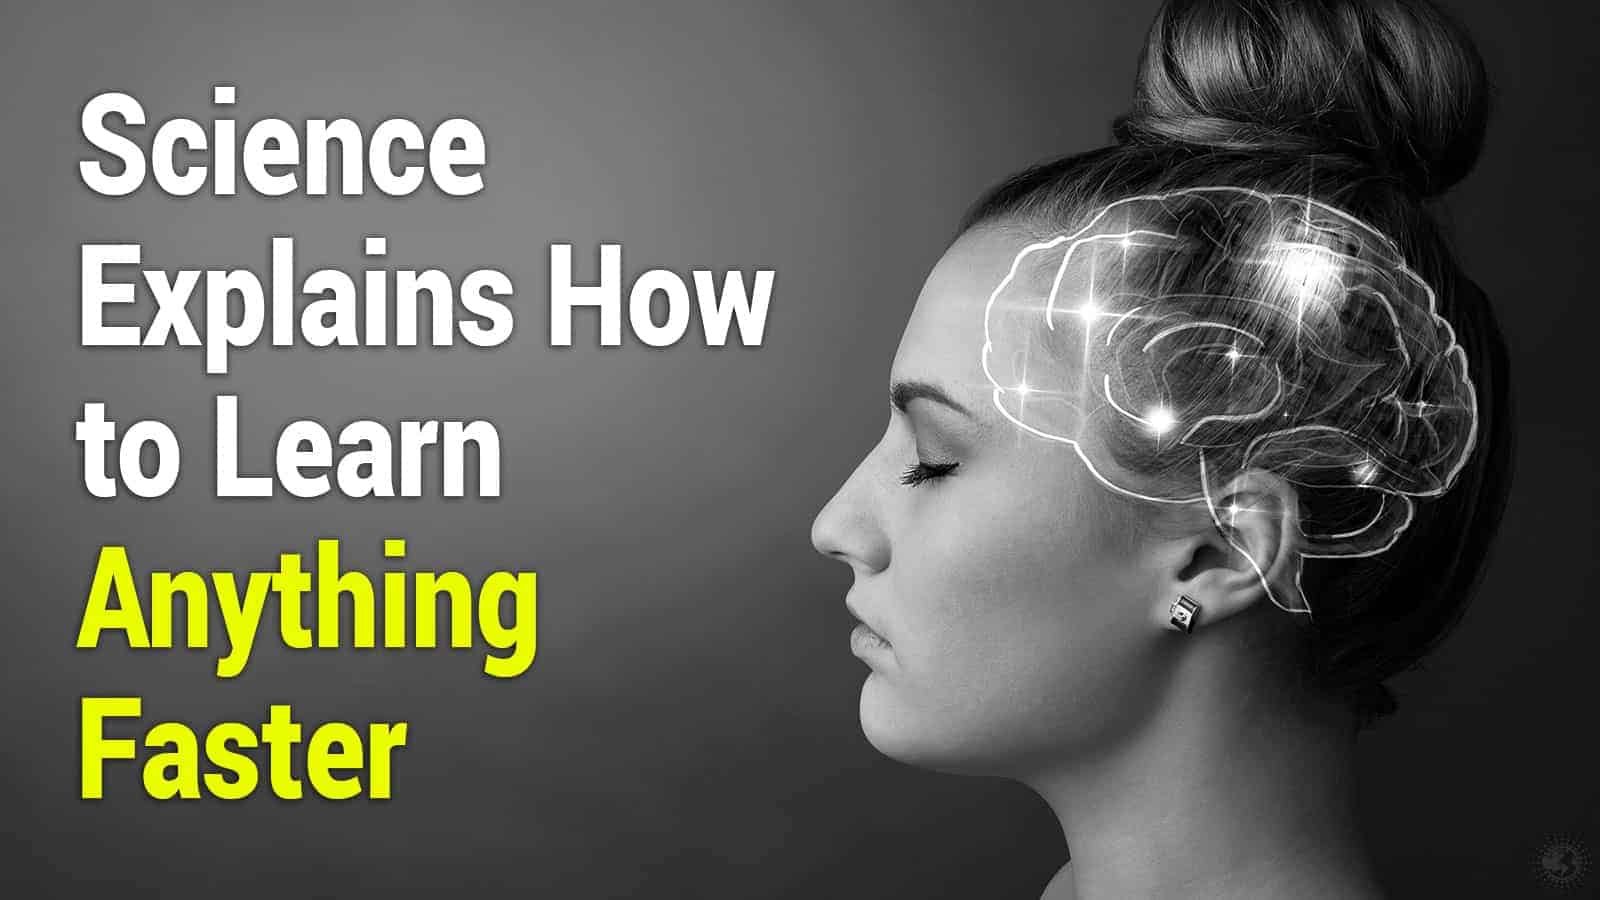 Science Explains How to Learn Anything Faster